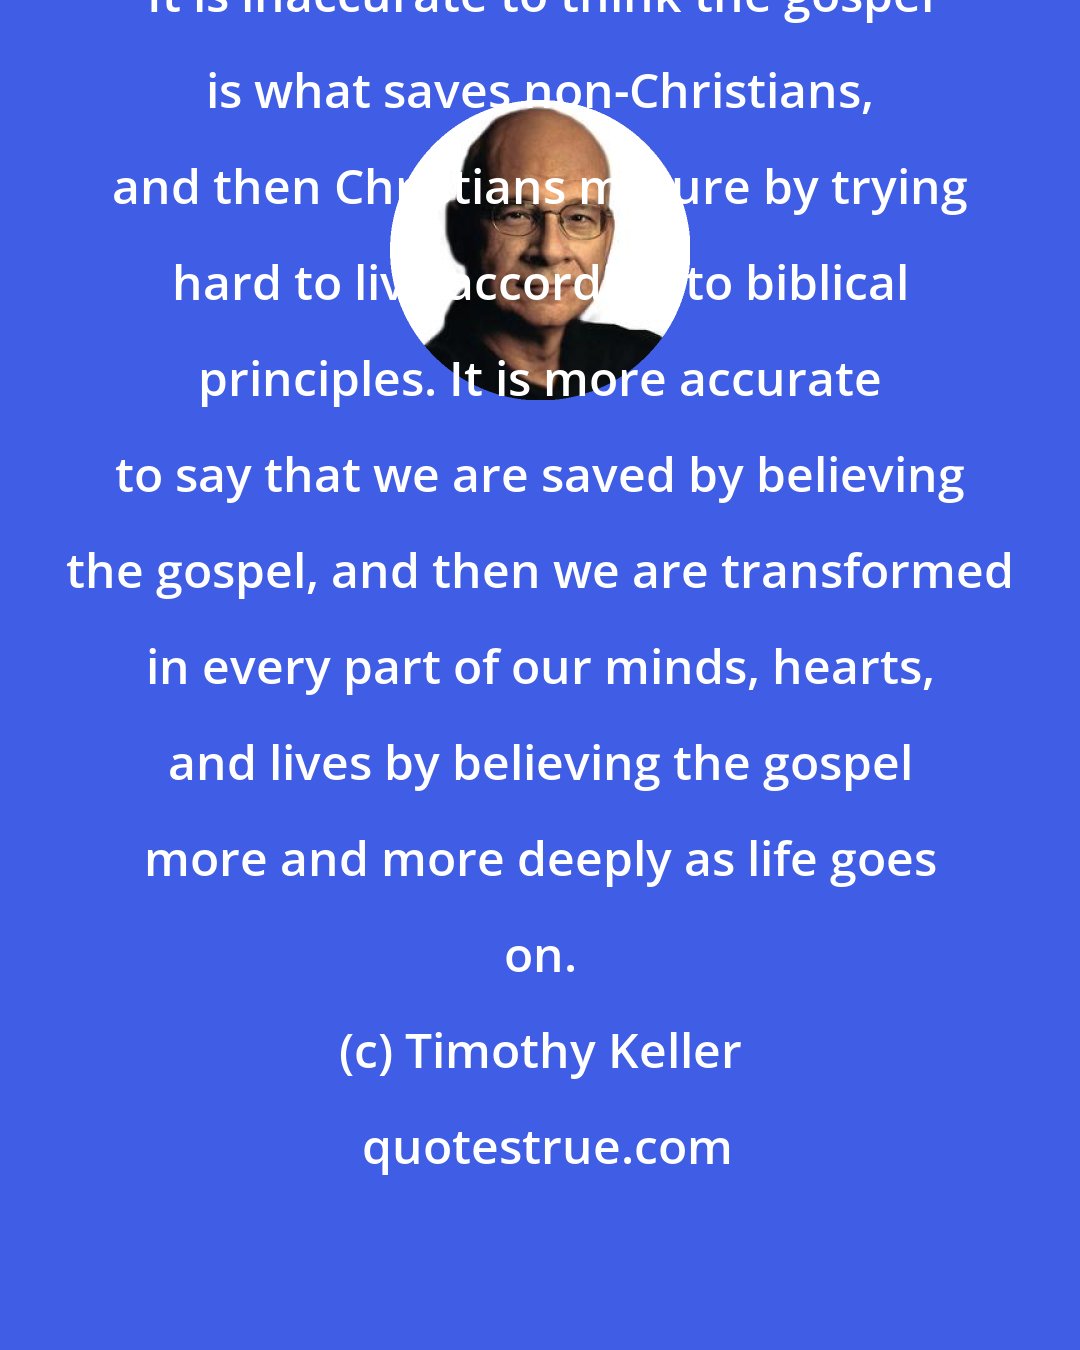 Timothy Keller: It is inaccurate to think the gospel is what saves non-Christians, and then Christians mature by trying hard to live according to biblical principles. It is more accurate to say that we are saved by believing the gospel, and then we are transformed in every part of our minds, hearts, and lives by believing the gospel more and more deeply as life goes on.